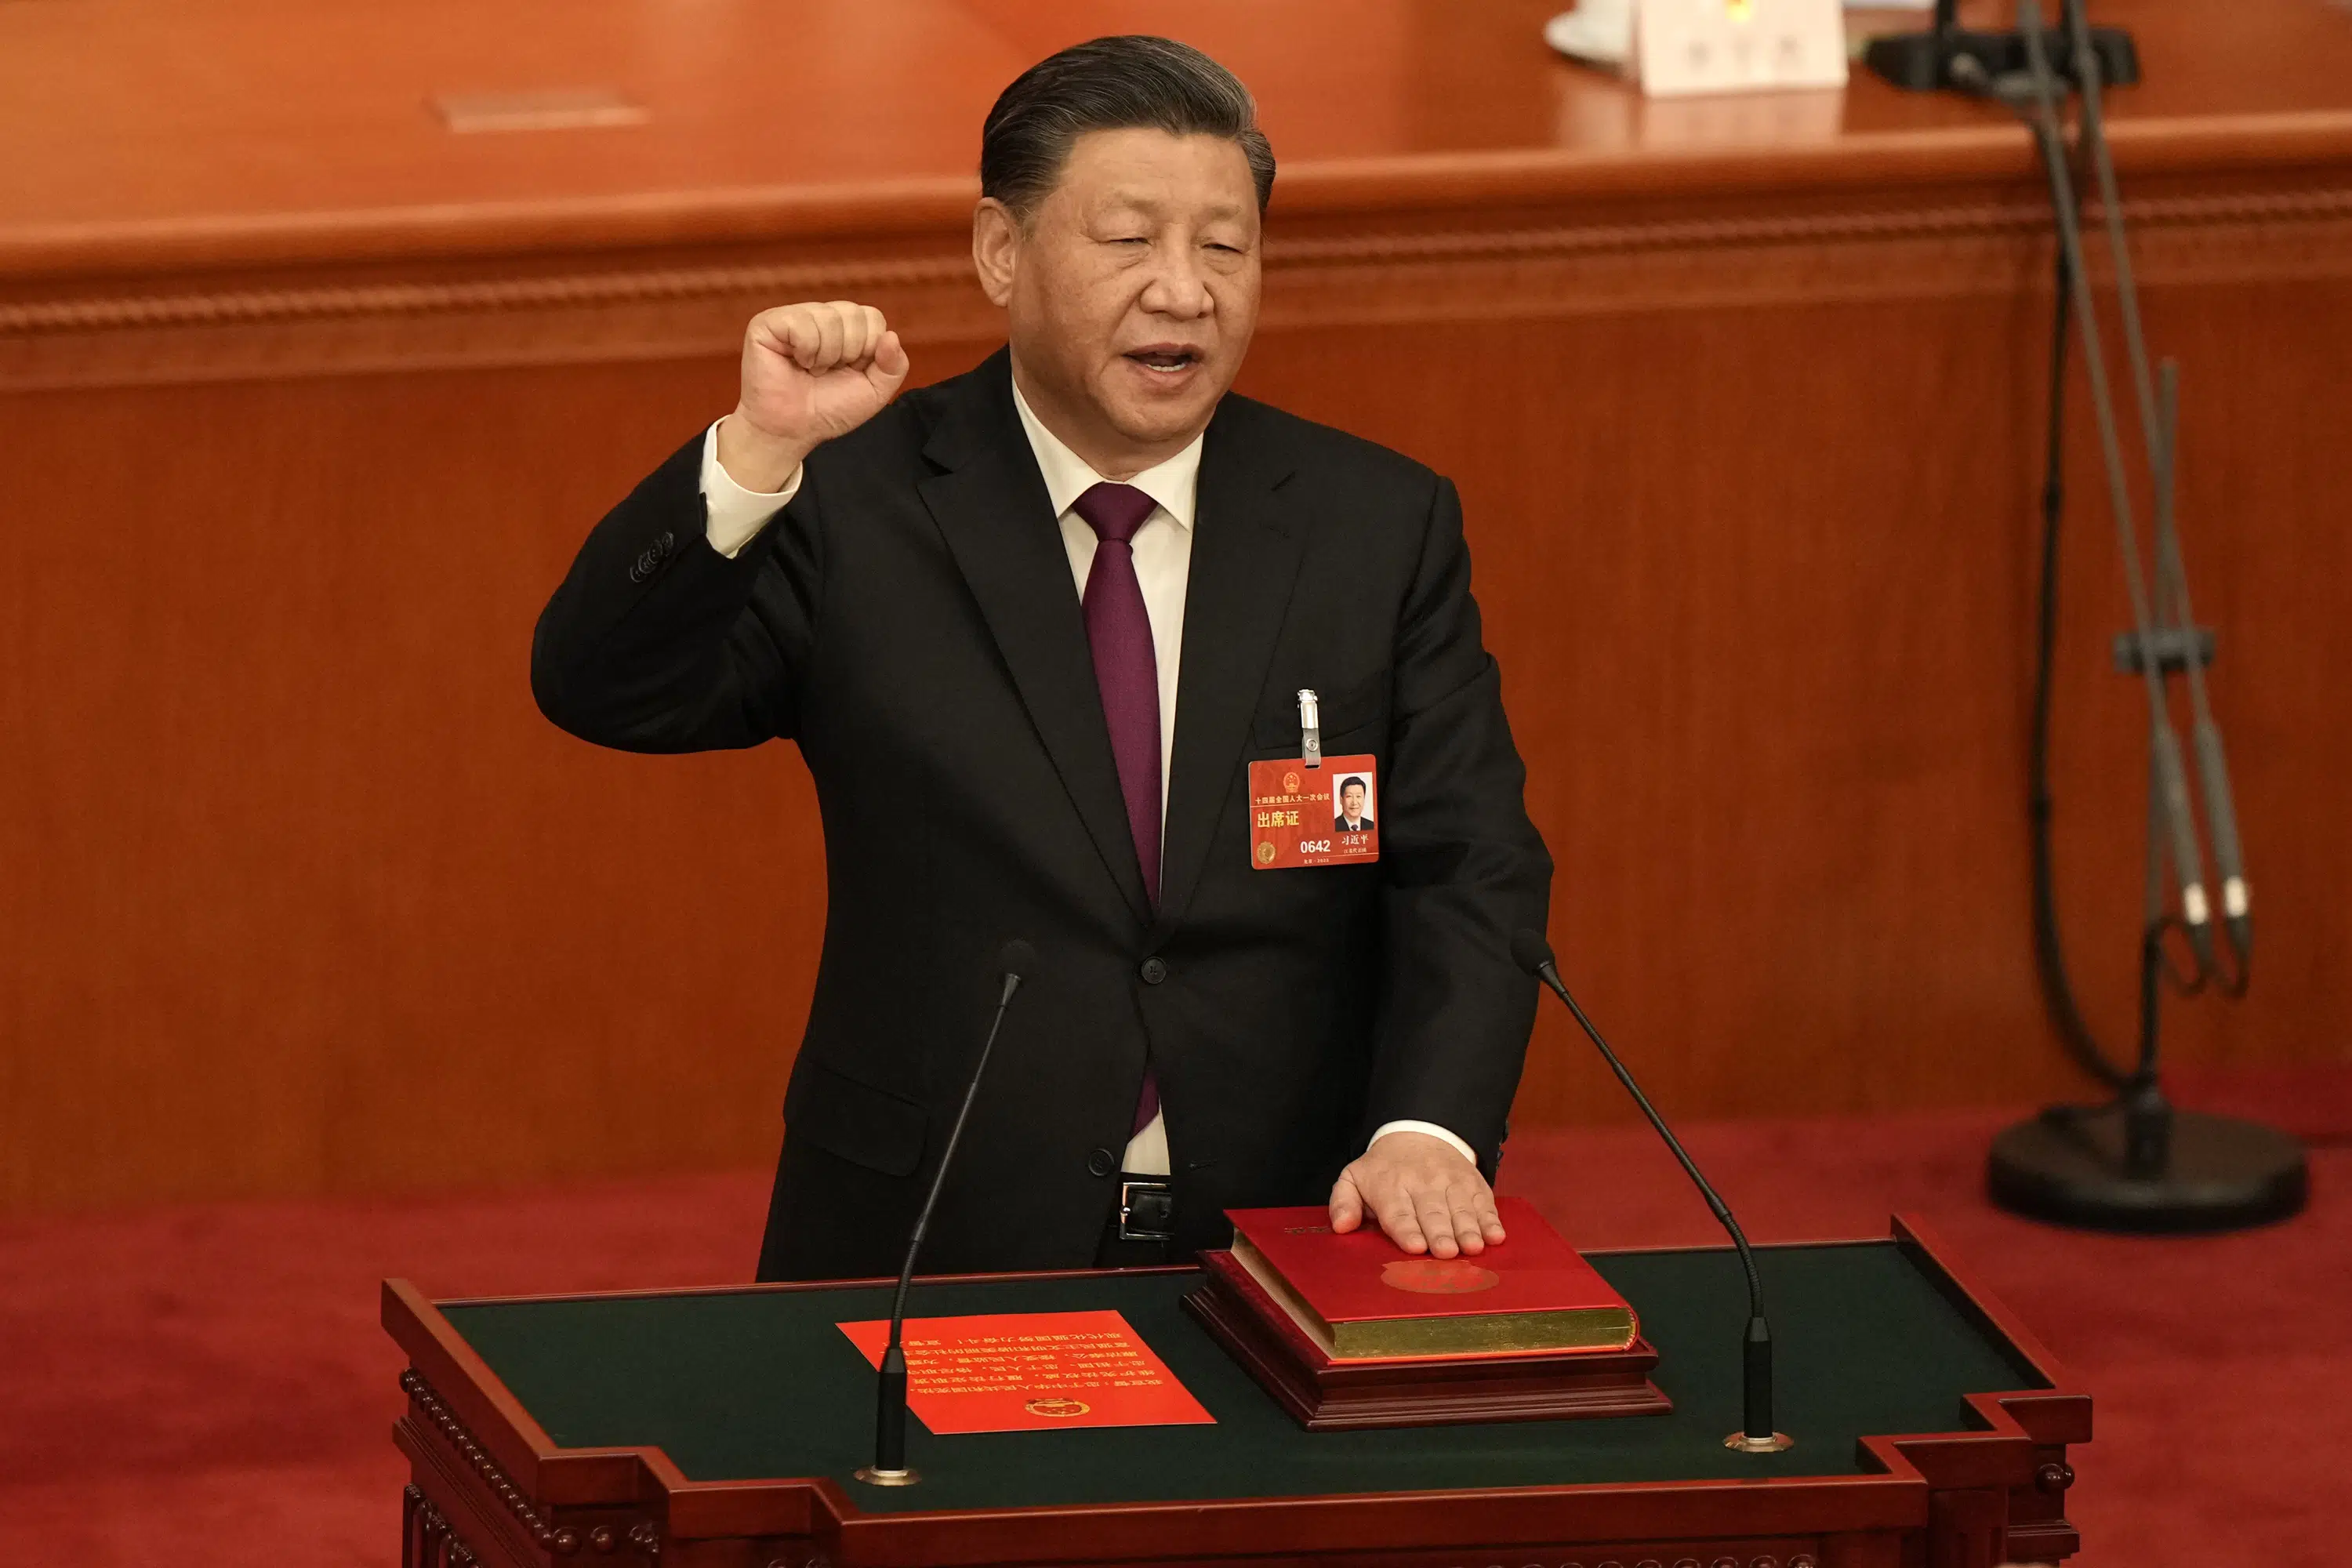 Xi awarded 3rd term as China's president, extending rule